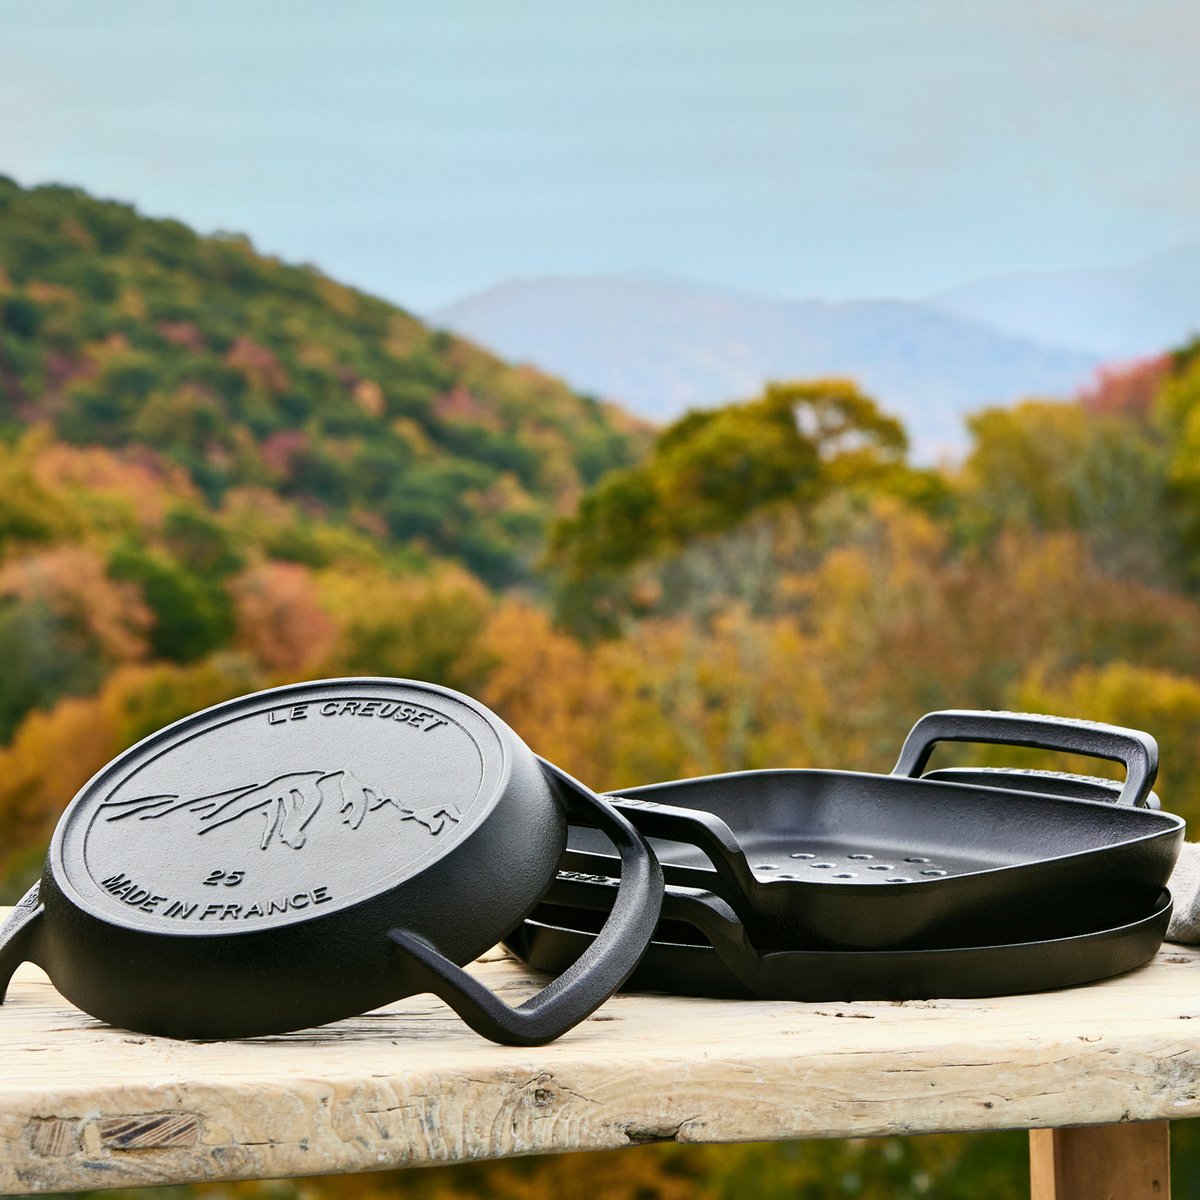 Beyond grilling accessories, beyond expectations... this is Le Creuset beyond the kitchen. 🔥Learn more about the Alpine Outdoor Collection, our new enameled cast iron collection designed for cooking over an open flame: bit.ly/49s6Ndp